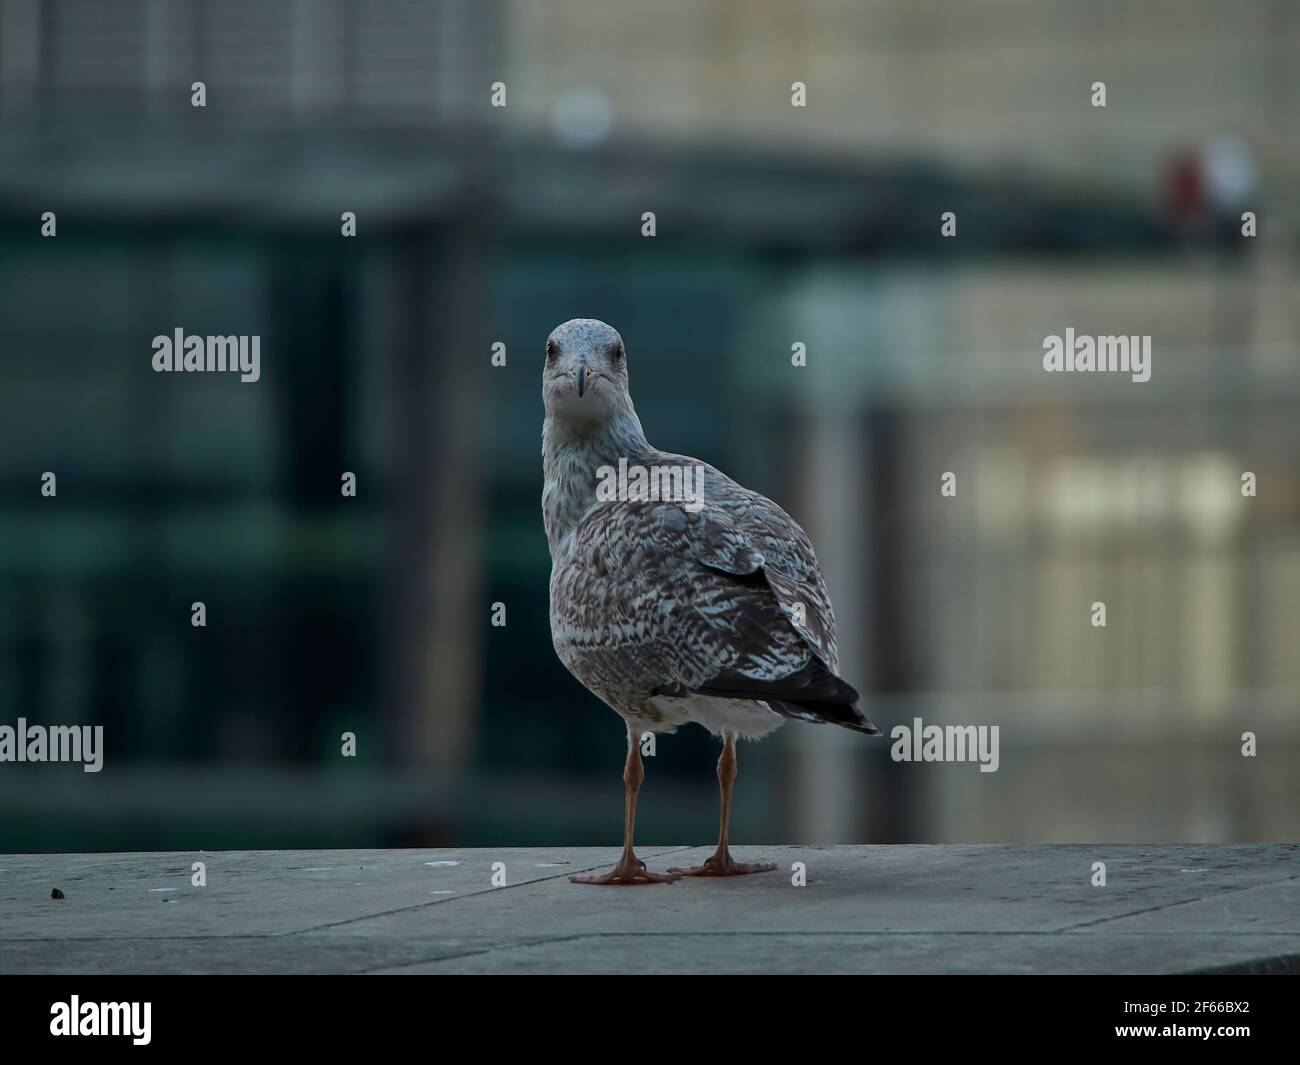 A gull looks over its shoulder, directly at the camera with, an aggressive and intimidating glare, ahead of a defocused background of London buildings Stock Photo